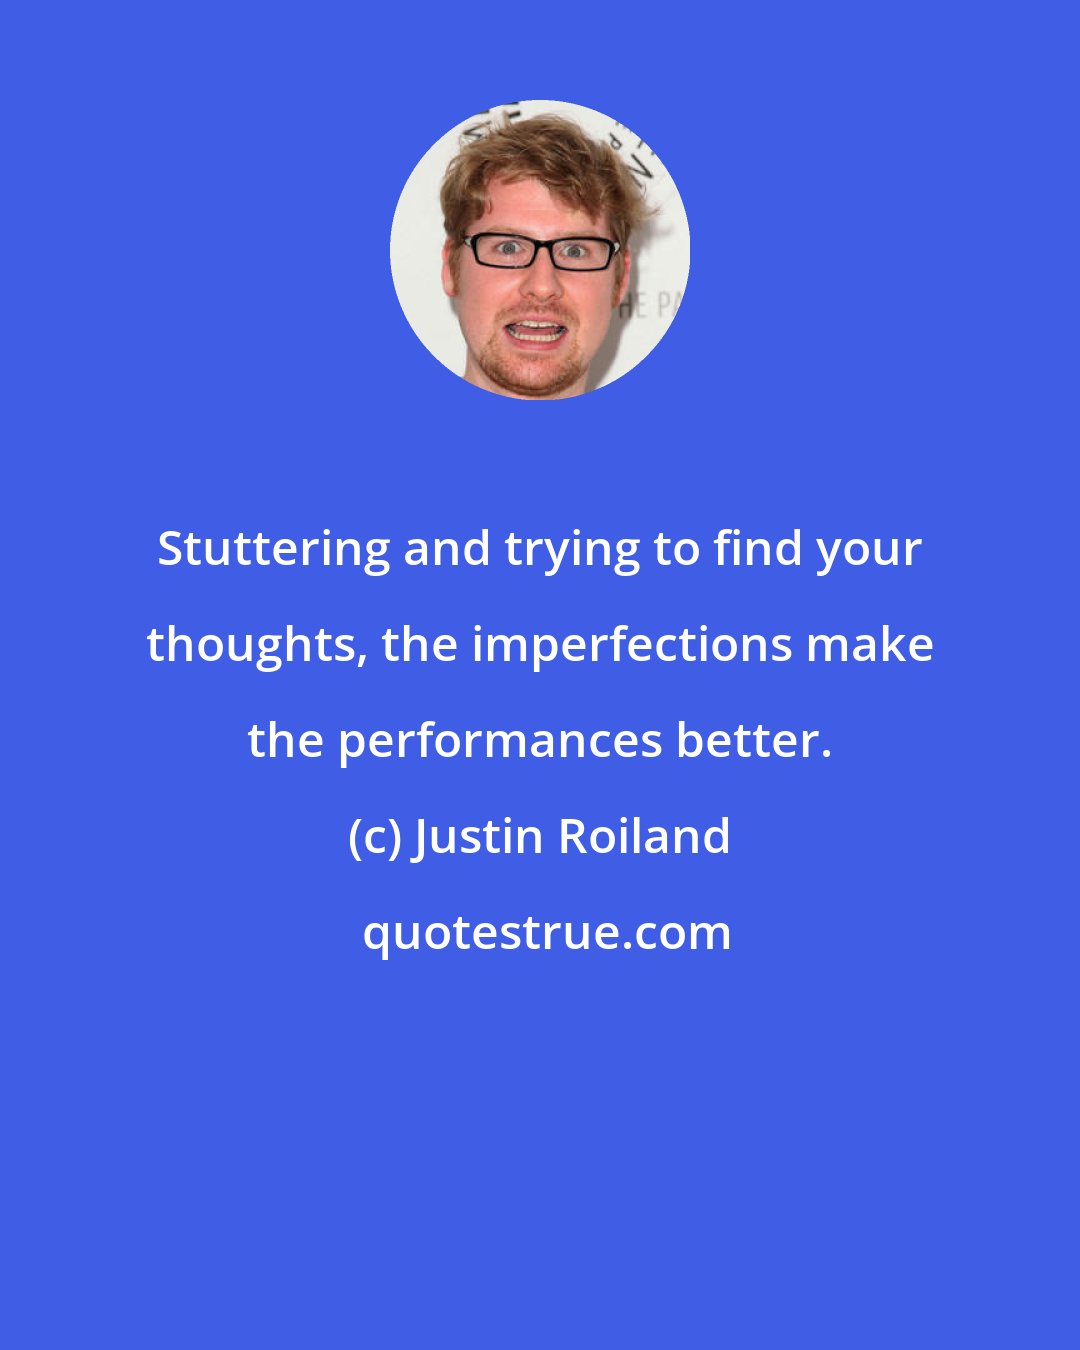 Justin Roiland: Stuttering and trying to find your thoughts, the imperfections make the performances better.